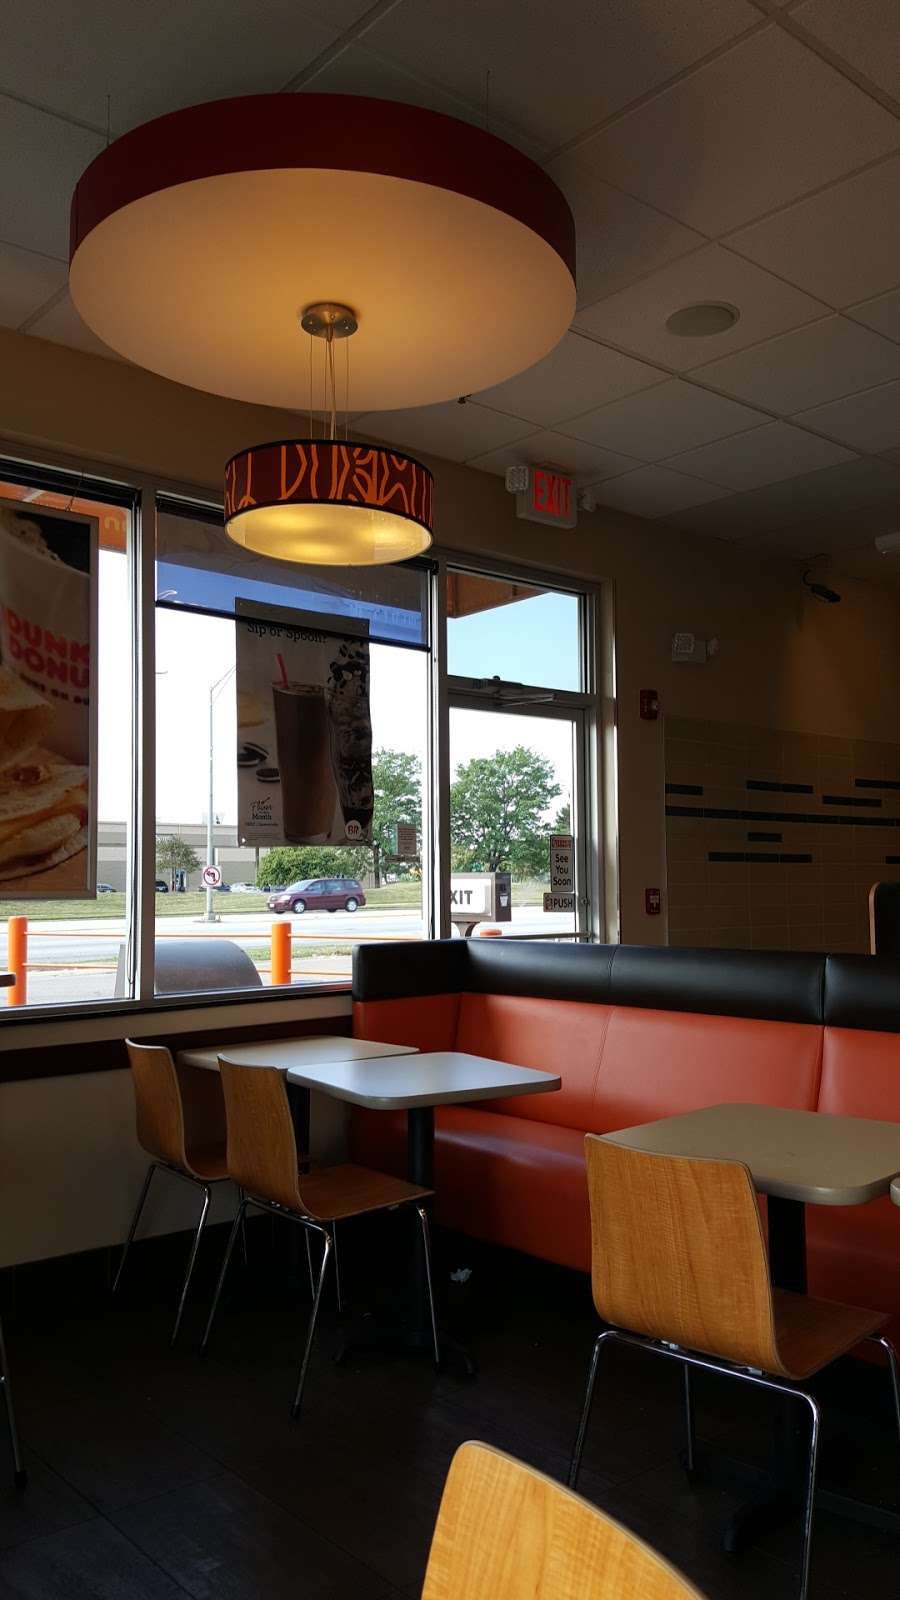 Dunkin Donuts | 148 North Ave, Northlake, IL 60164 | Phone: (708) 531-9006